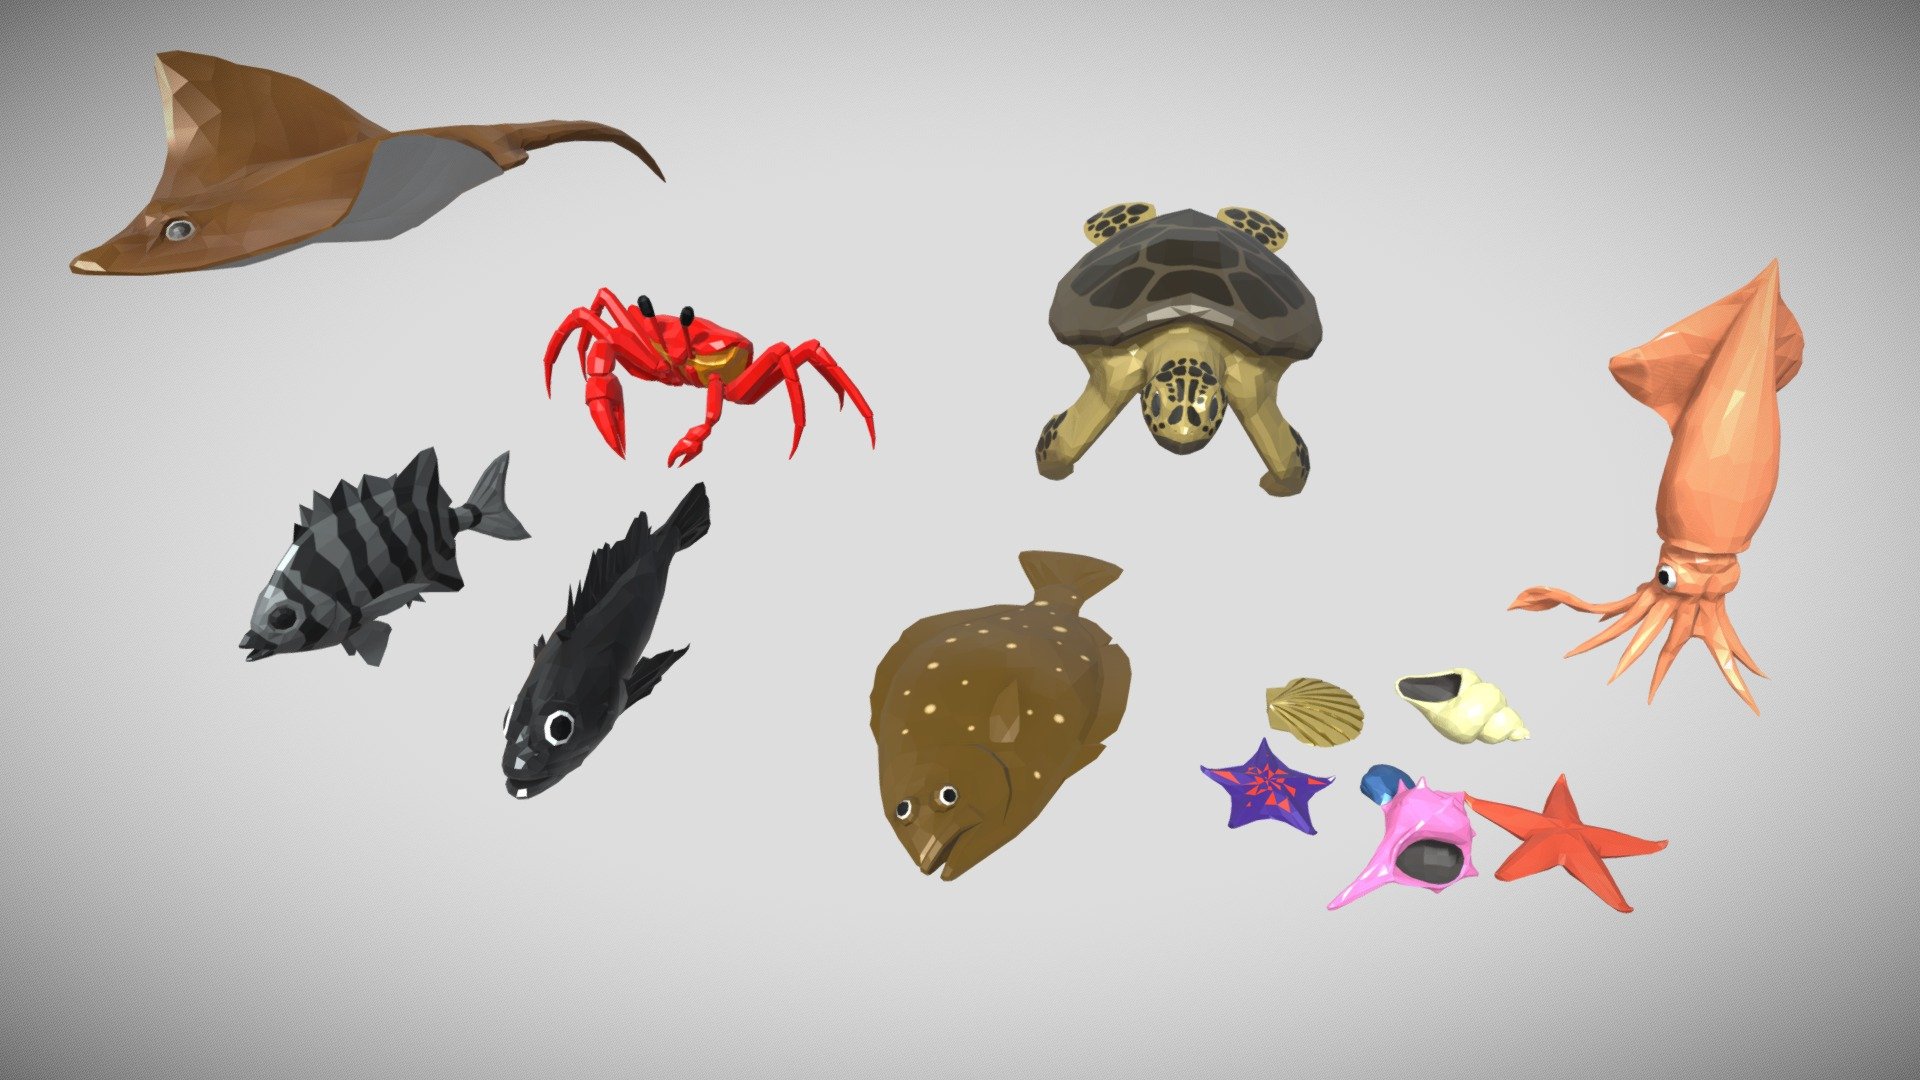 Demo video: https://youtu.be/GZj4cLkkvaY

Contents


7 fully rigged sea animals + bonus clams for props!
Essential animations for each sea animal
Cute and easy-to-use design

Animations


Crab: Walk, Eat
Flatfish: Swim, Flop
Sea Turtle: Swim, Crawl
Sebastes: Swim, Flop
Squid: Swim, Hunt
Sting Ray: Swim, Turn
Stone Sea Bream: Swim, Flop

A blender file of each sea animal's included. You can use the rig, create and adjust animations as you like.

Thank you so much for your interest. Our goal is to create assets that are useful and practical for your project! If you have any question or suggestion, please send us an email to customersupport@jiffycrew.com. We'll be more than happy to help 3d model